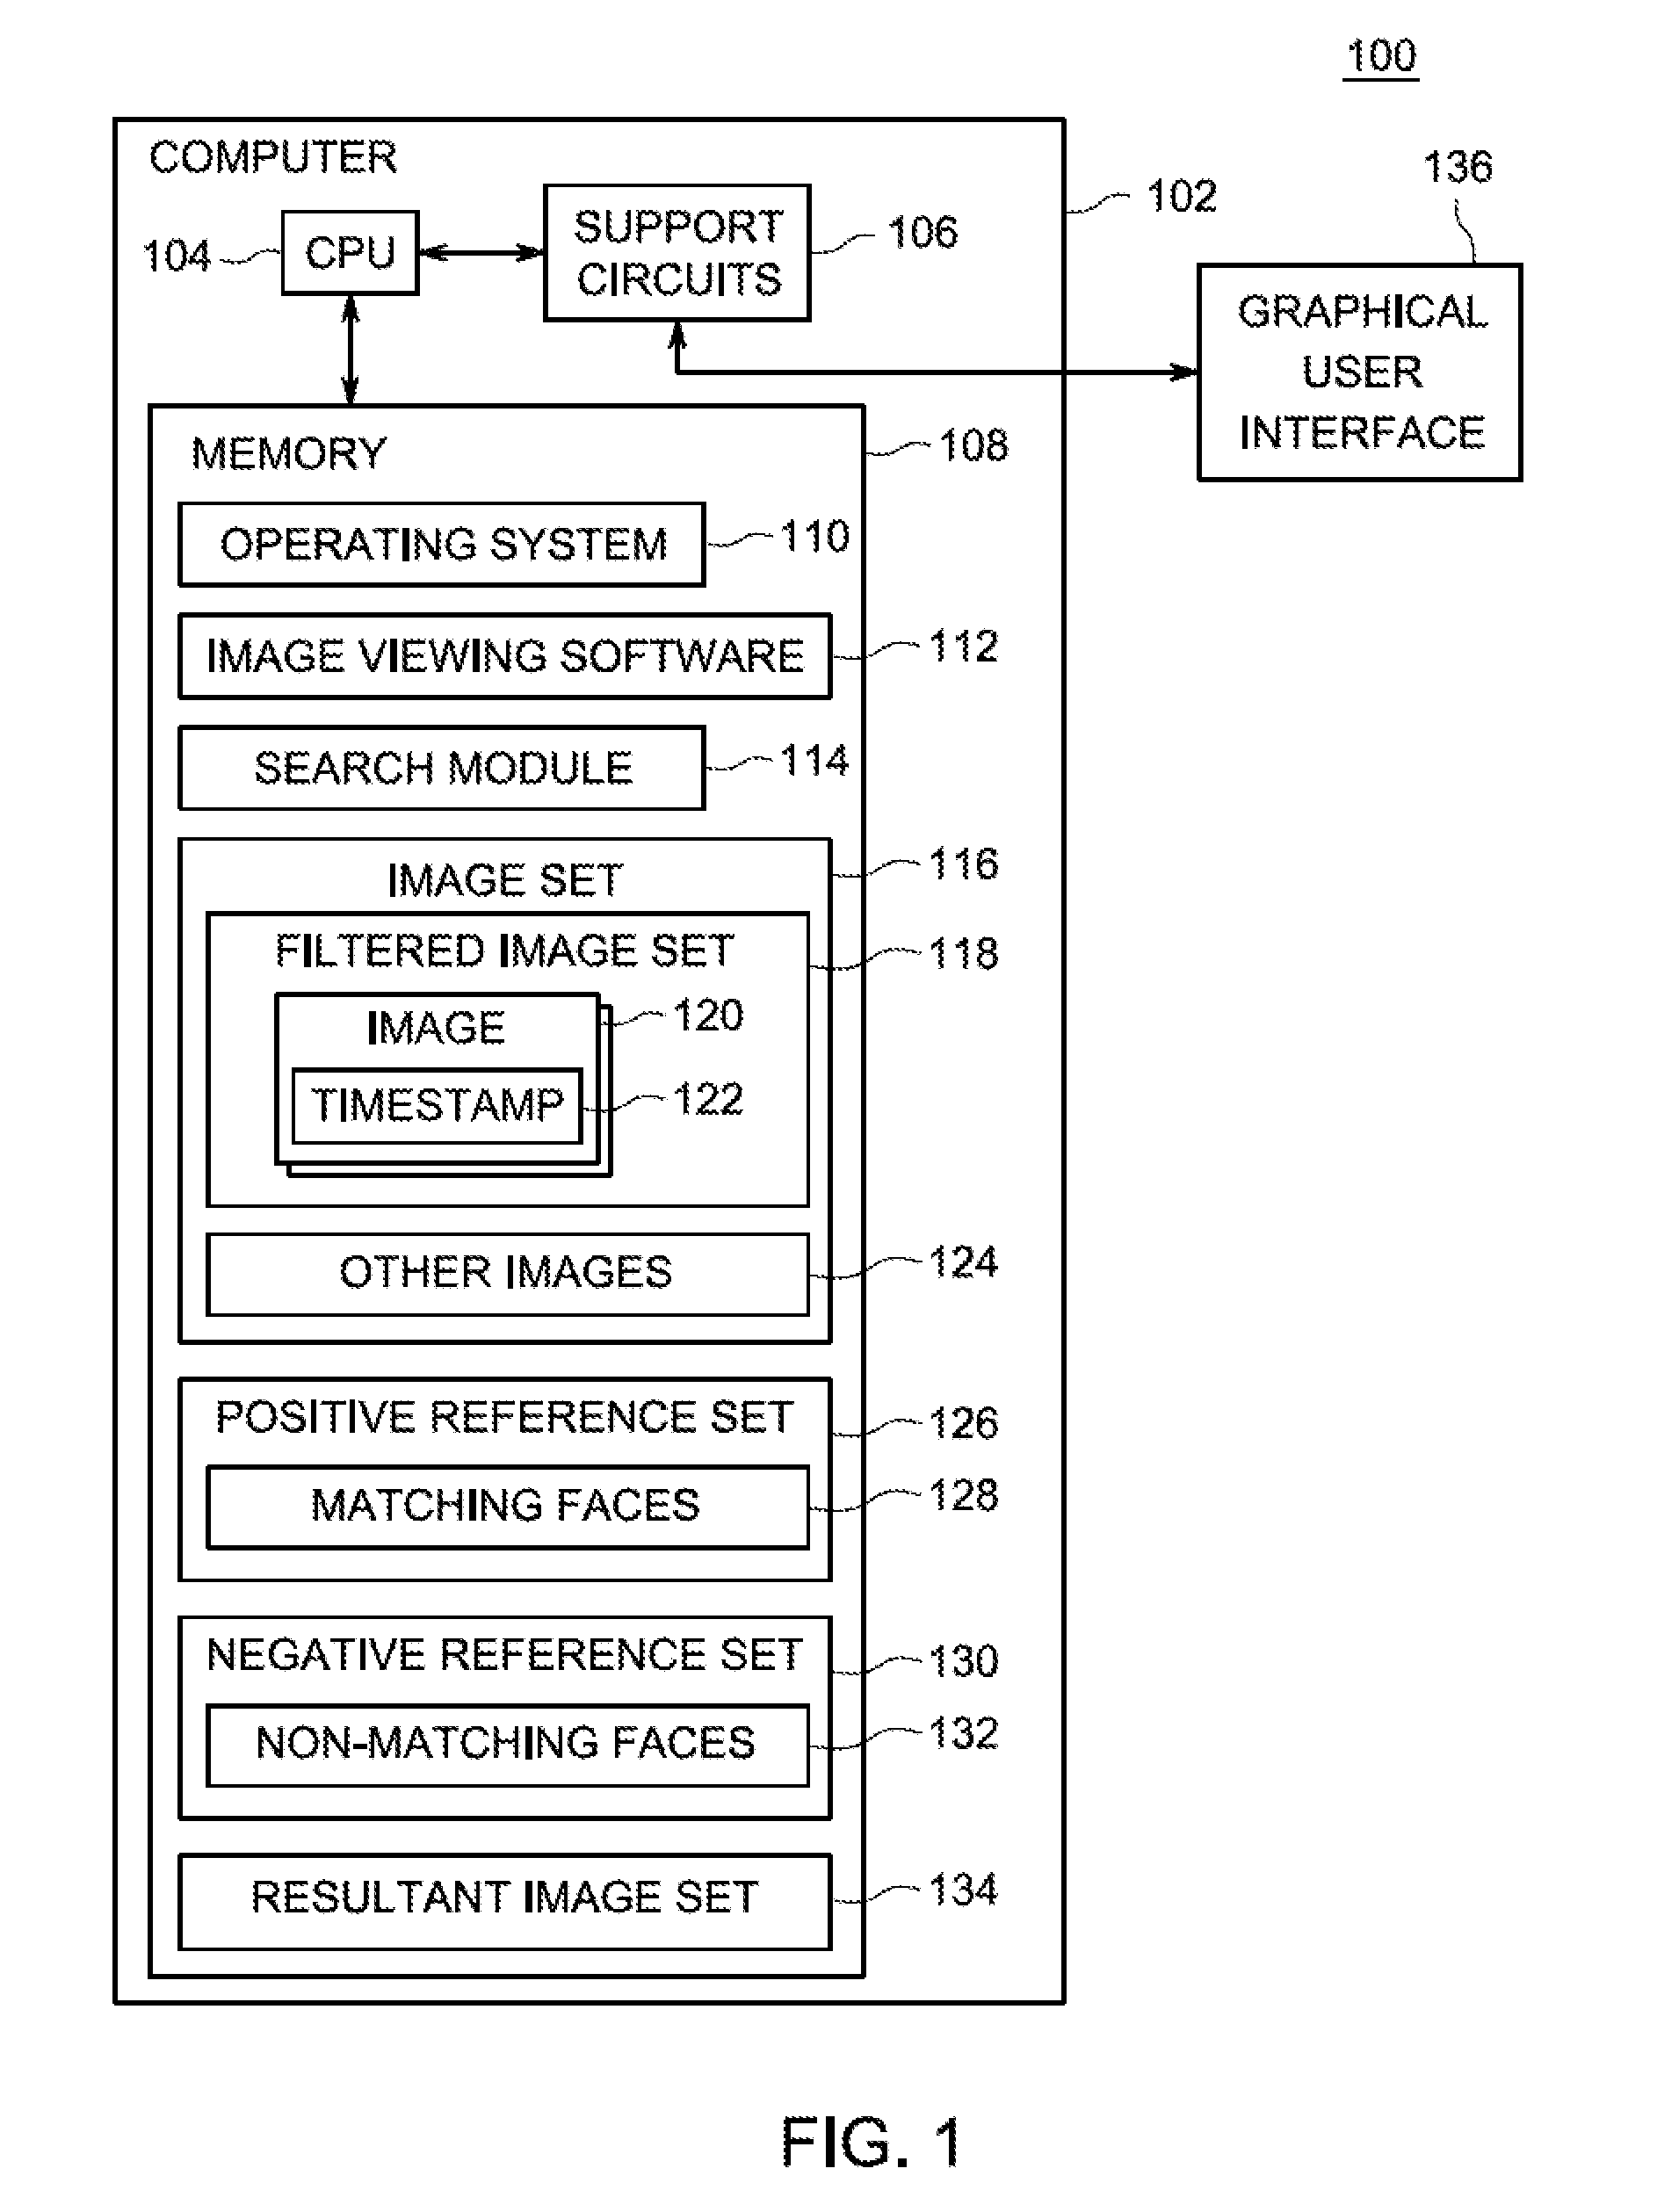 Method and apparatus for mitigating face aging errors when performing facial recognition